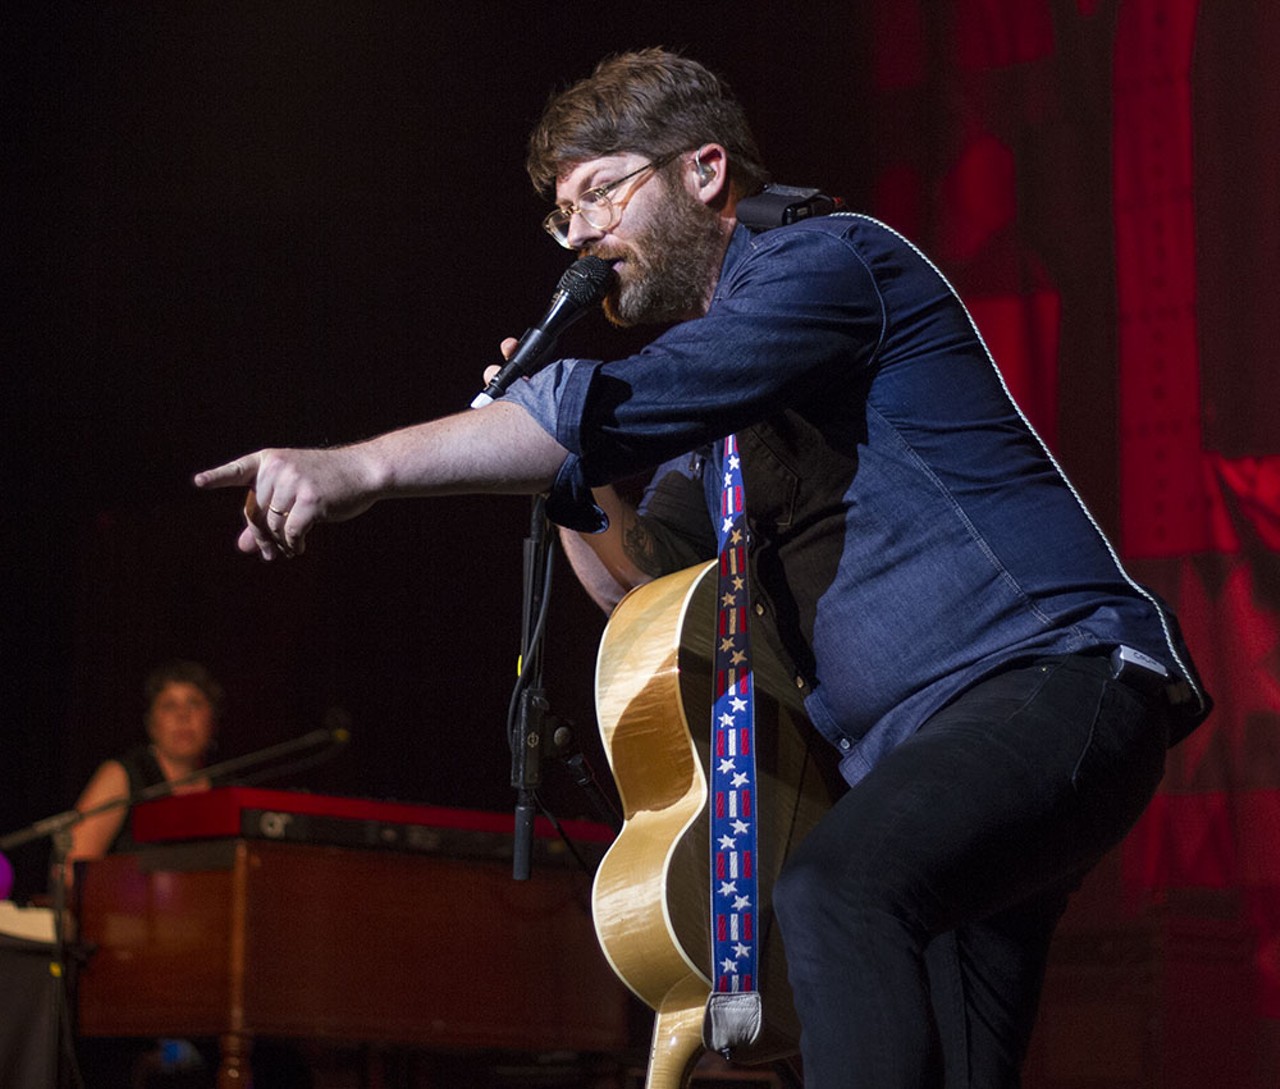 29 photos from The Decemberists at Michigan Theater